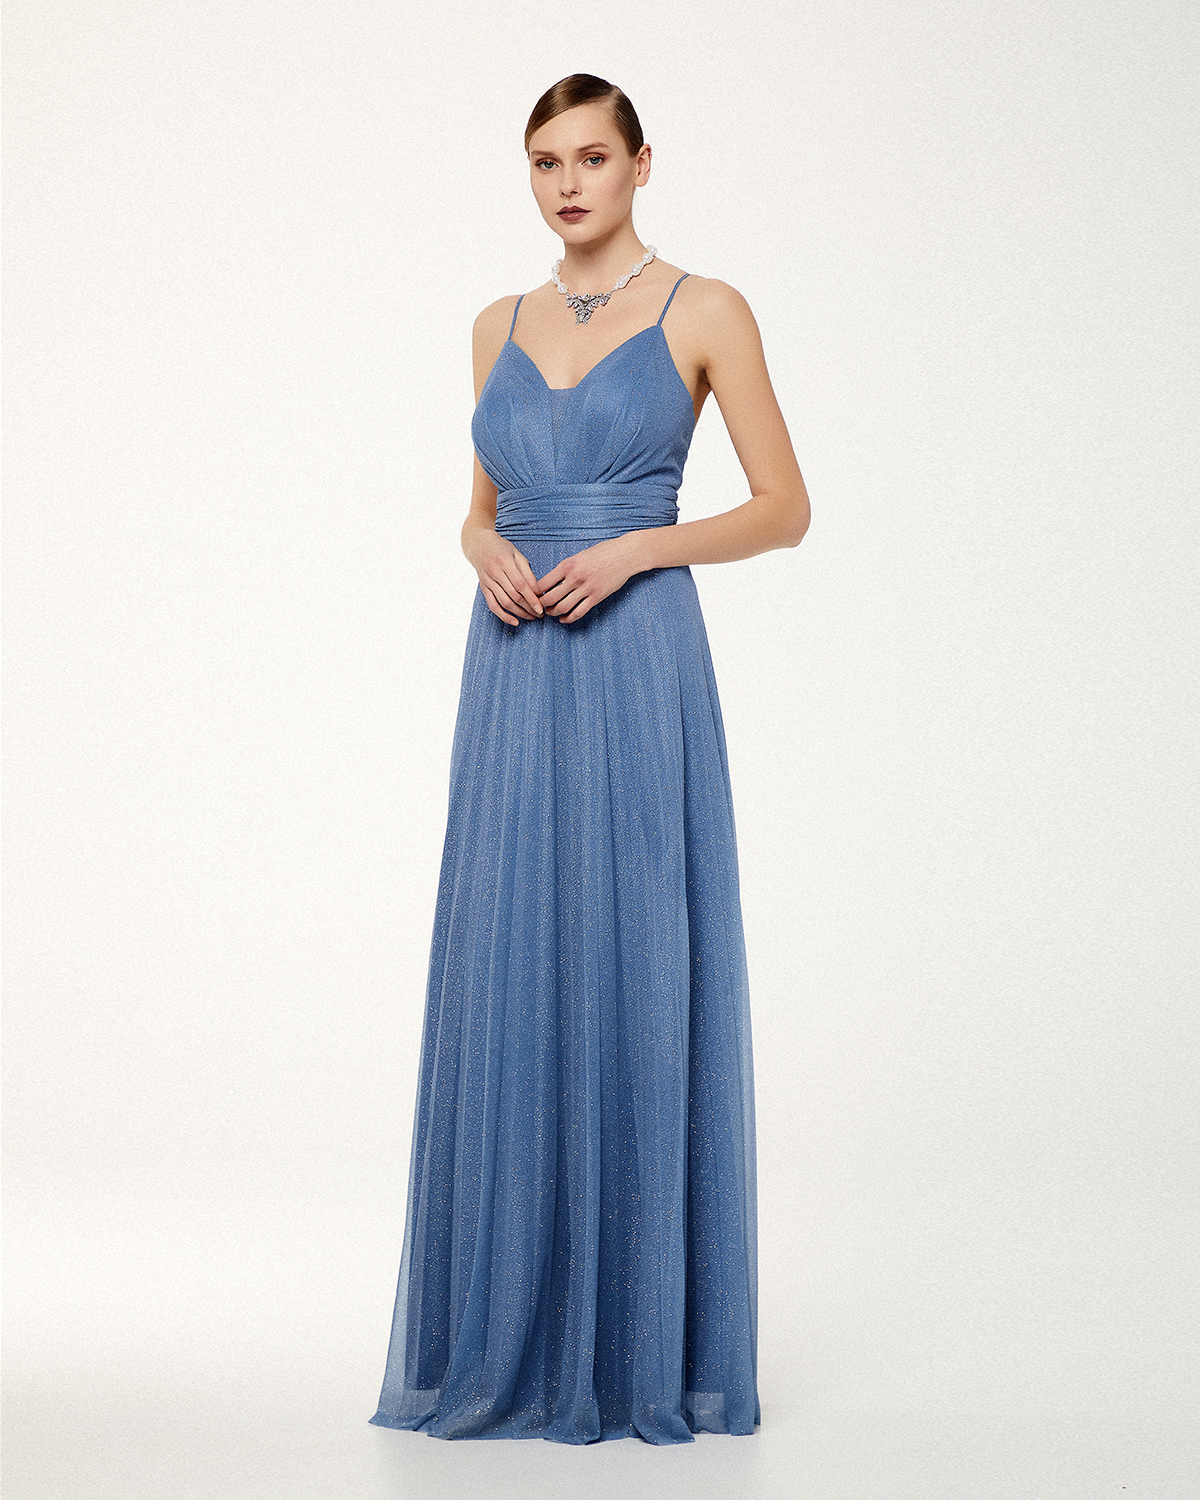 Cocktail Dresses / Long cocktail pleated dress with shining fabric and straps